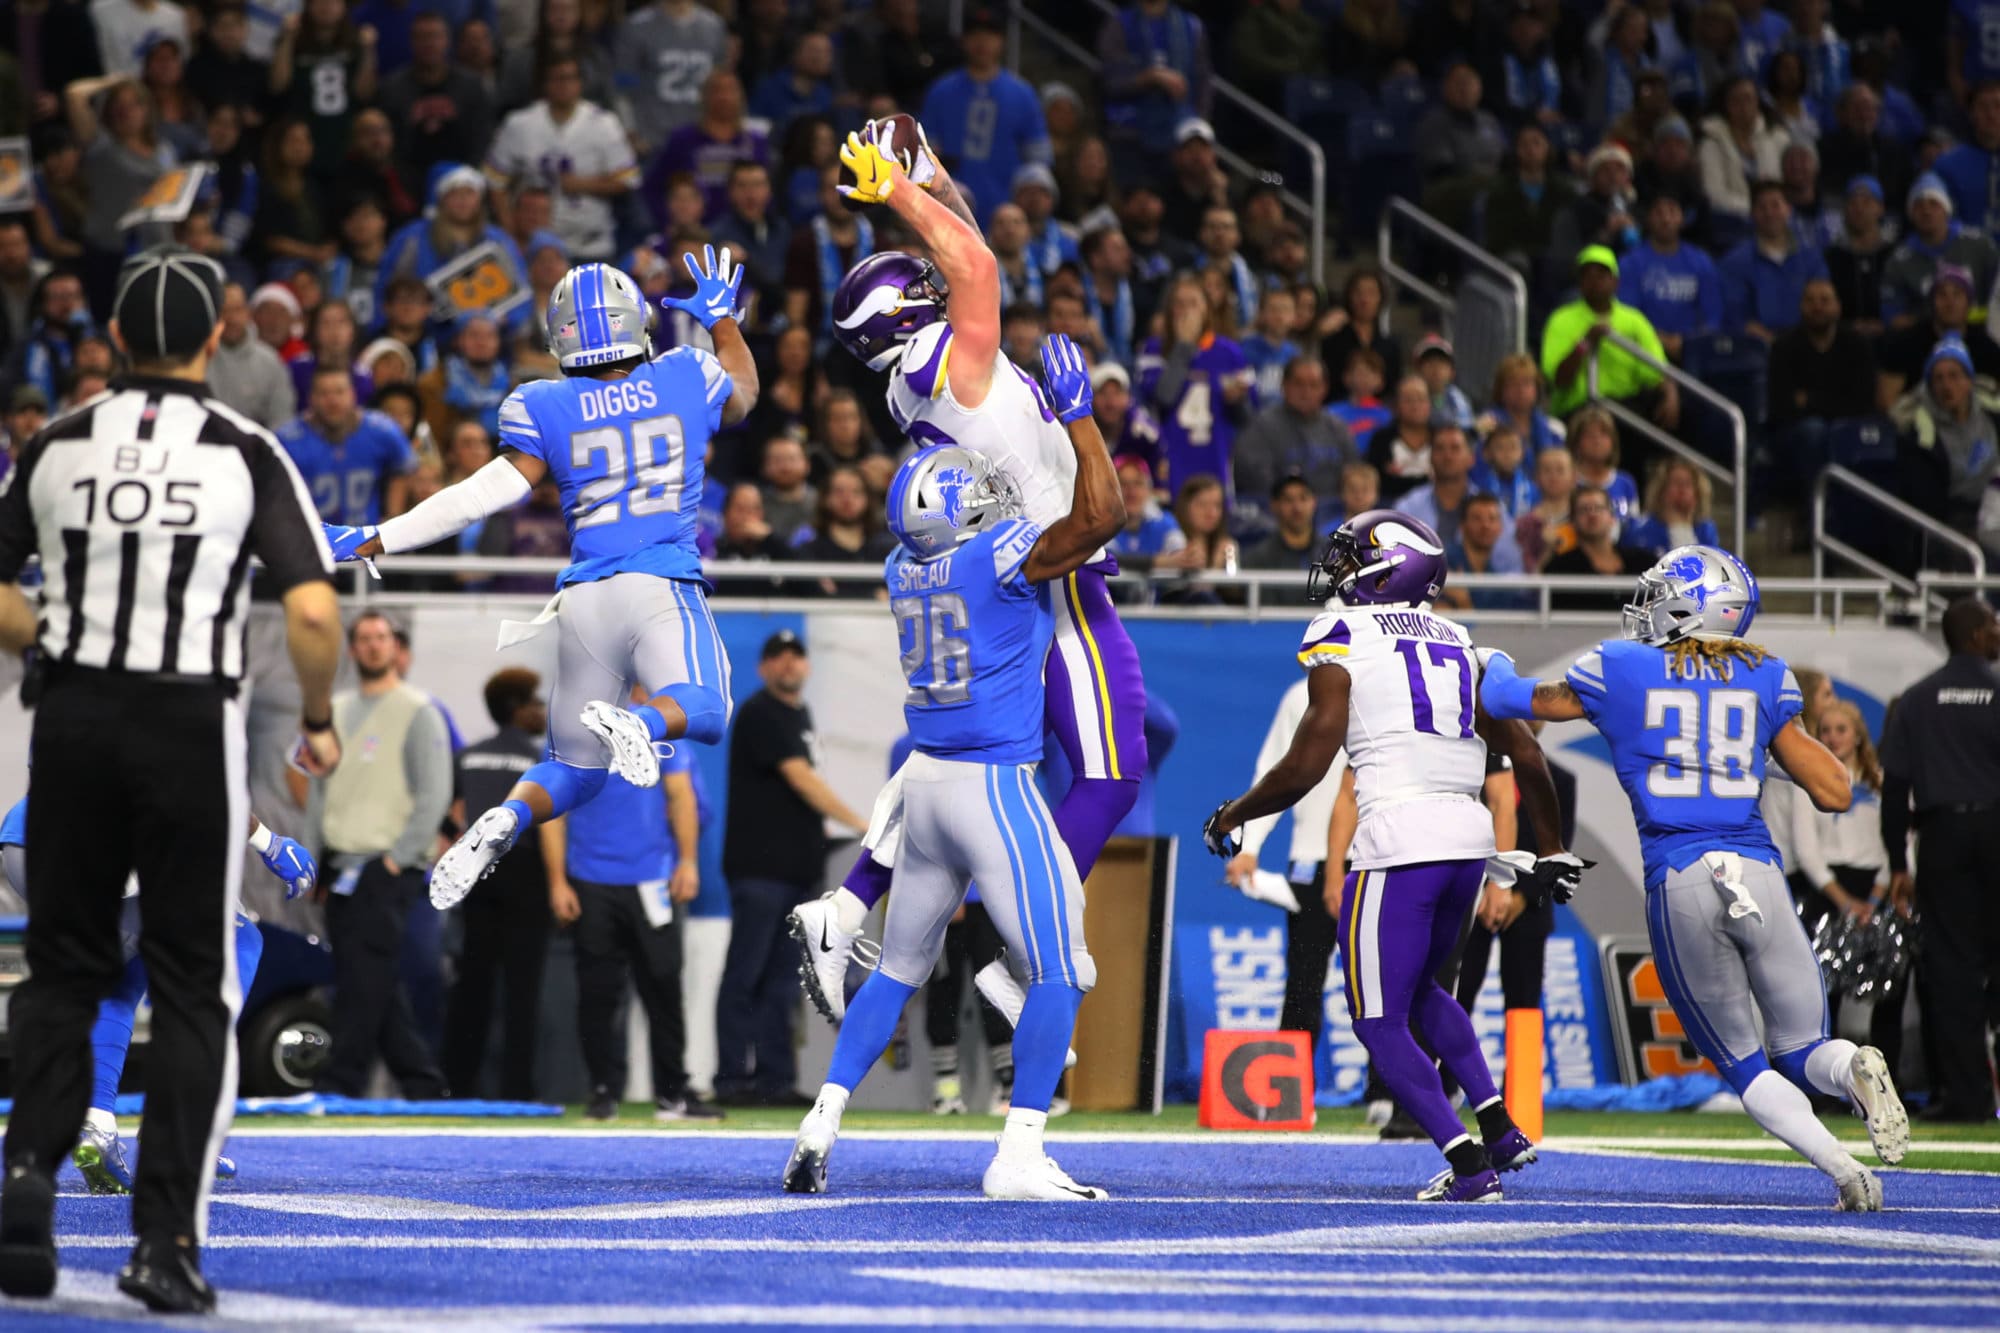 DETROIT, MI - DECEMBER 23: Kyle Rudolph #82 of the Minnesota Vikings makes a touch down catch in the second quarter against the Detroit Lions at Ford Field on December 23, 2018 in Detroit, Michigan. (Photo by Gregory Shamus/Getty Images)